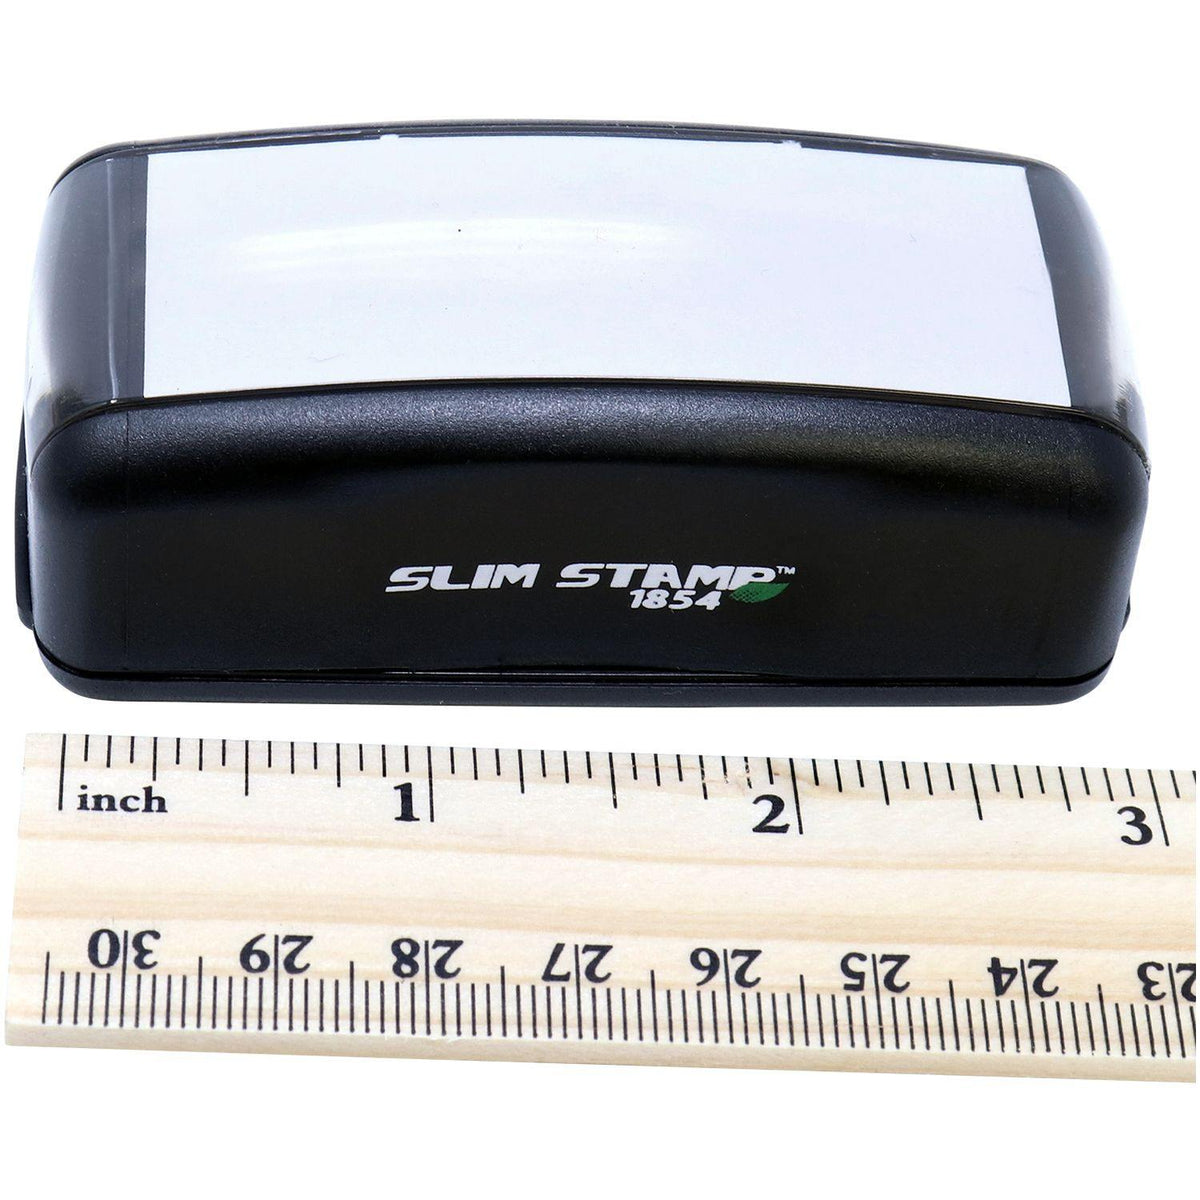 Measurement Large Pre Inked School Meeting Tonight Stamp with Ruler